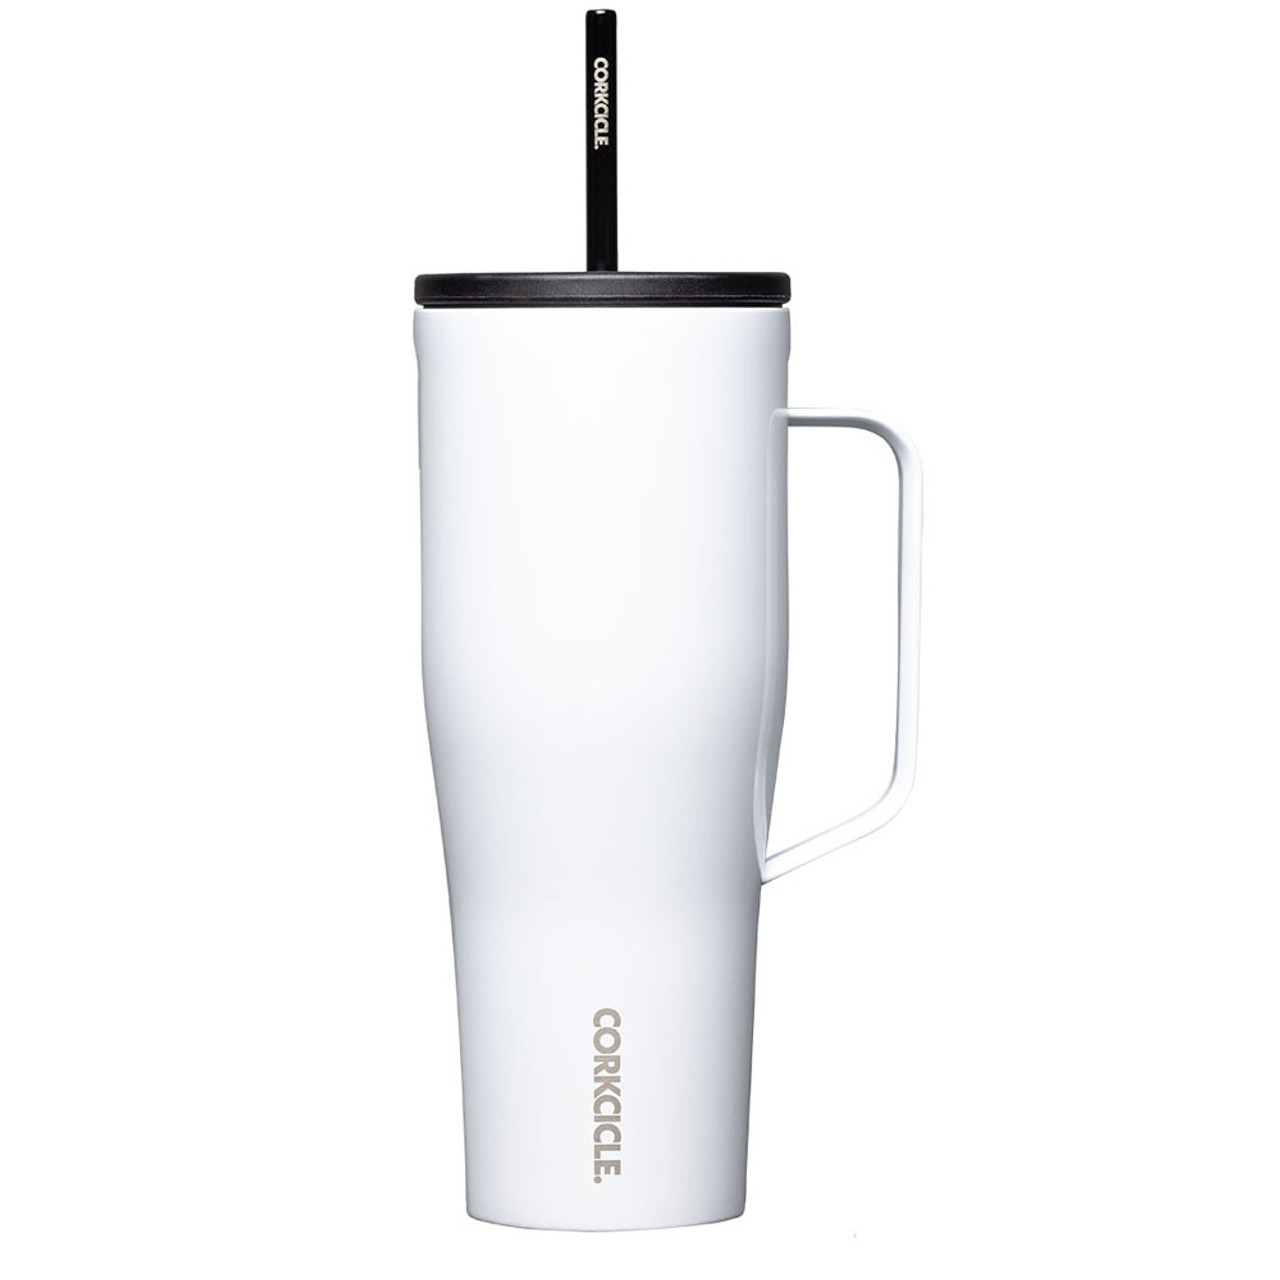 https://cdn11.bigcommerce.com/s-zut1msomd6/images/stencil/1280x1280/products/38647/236974/corkcicle-30-oz-cold-cup-xl-2230GW-gloss-white-main__63997.1691430045.jpg?c=1